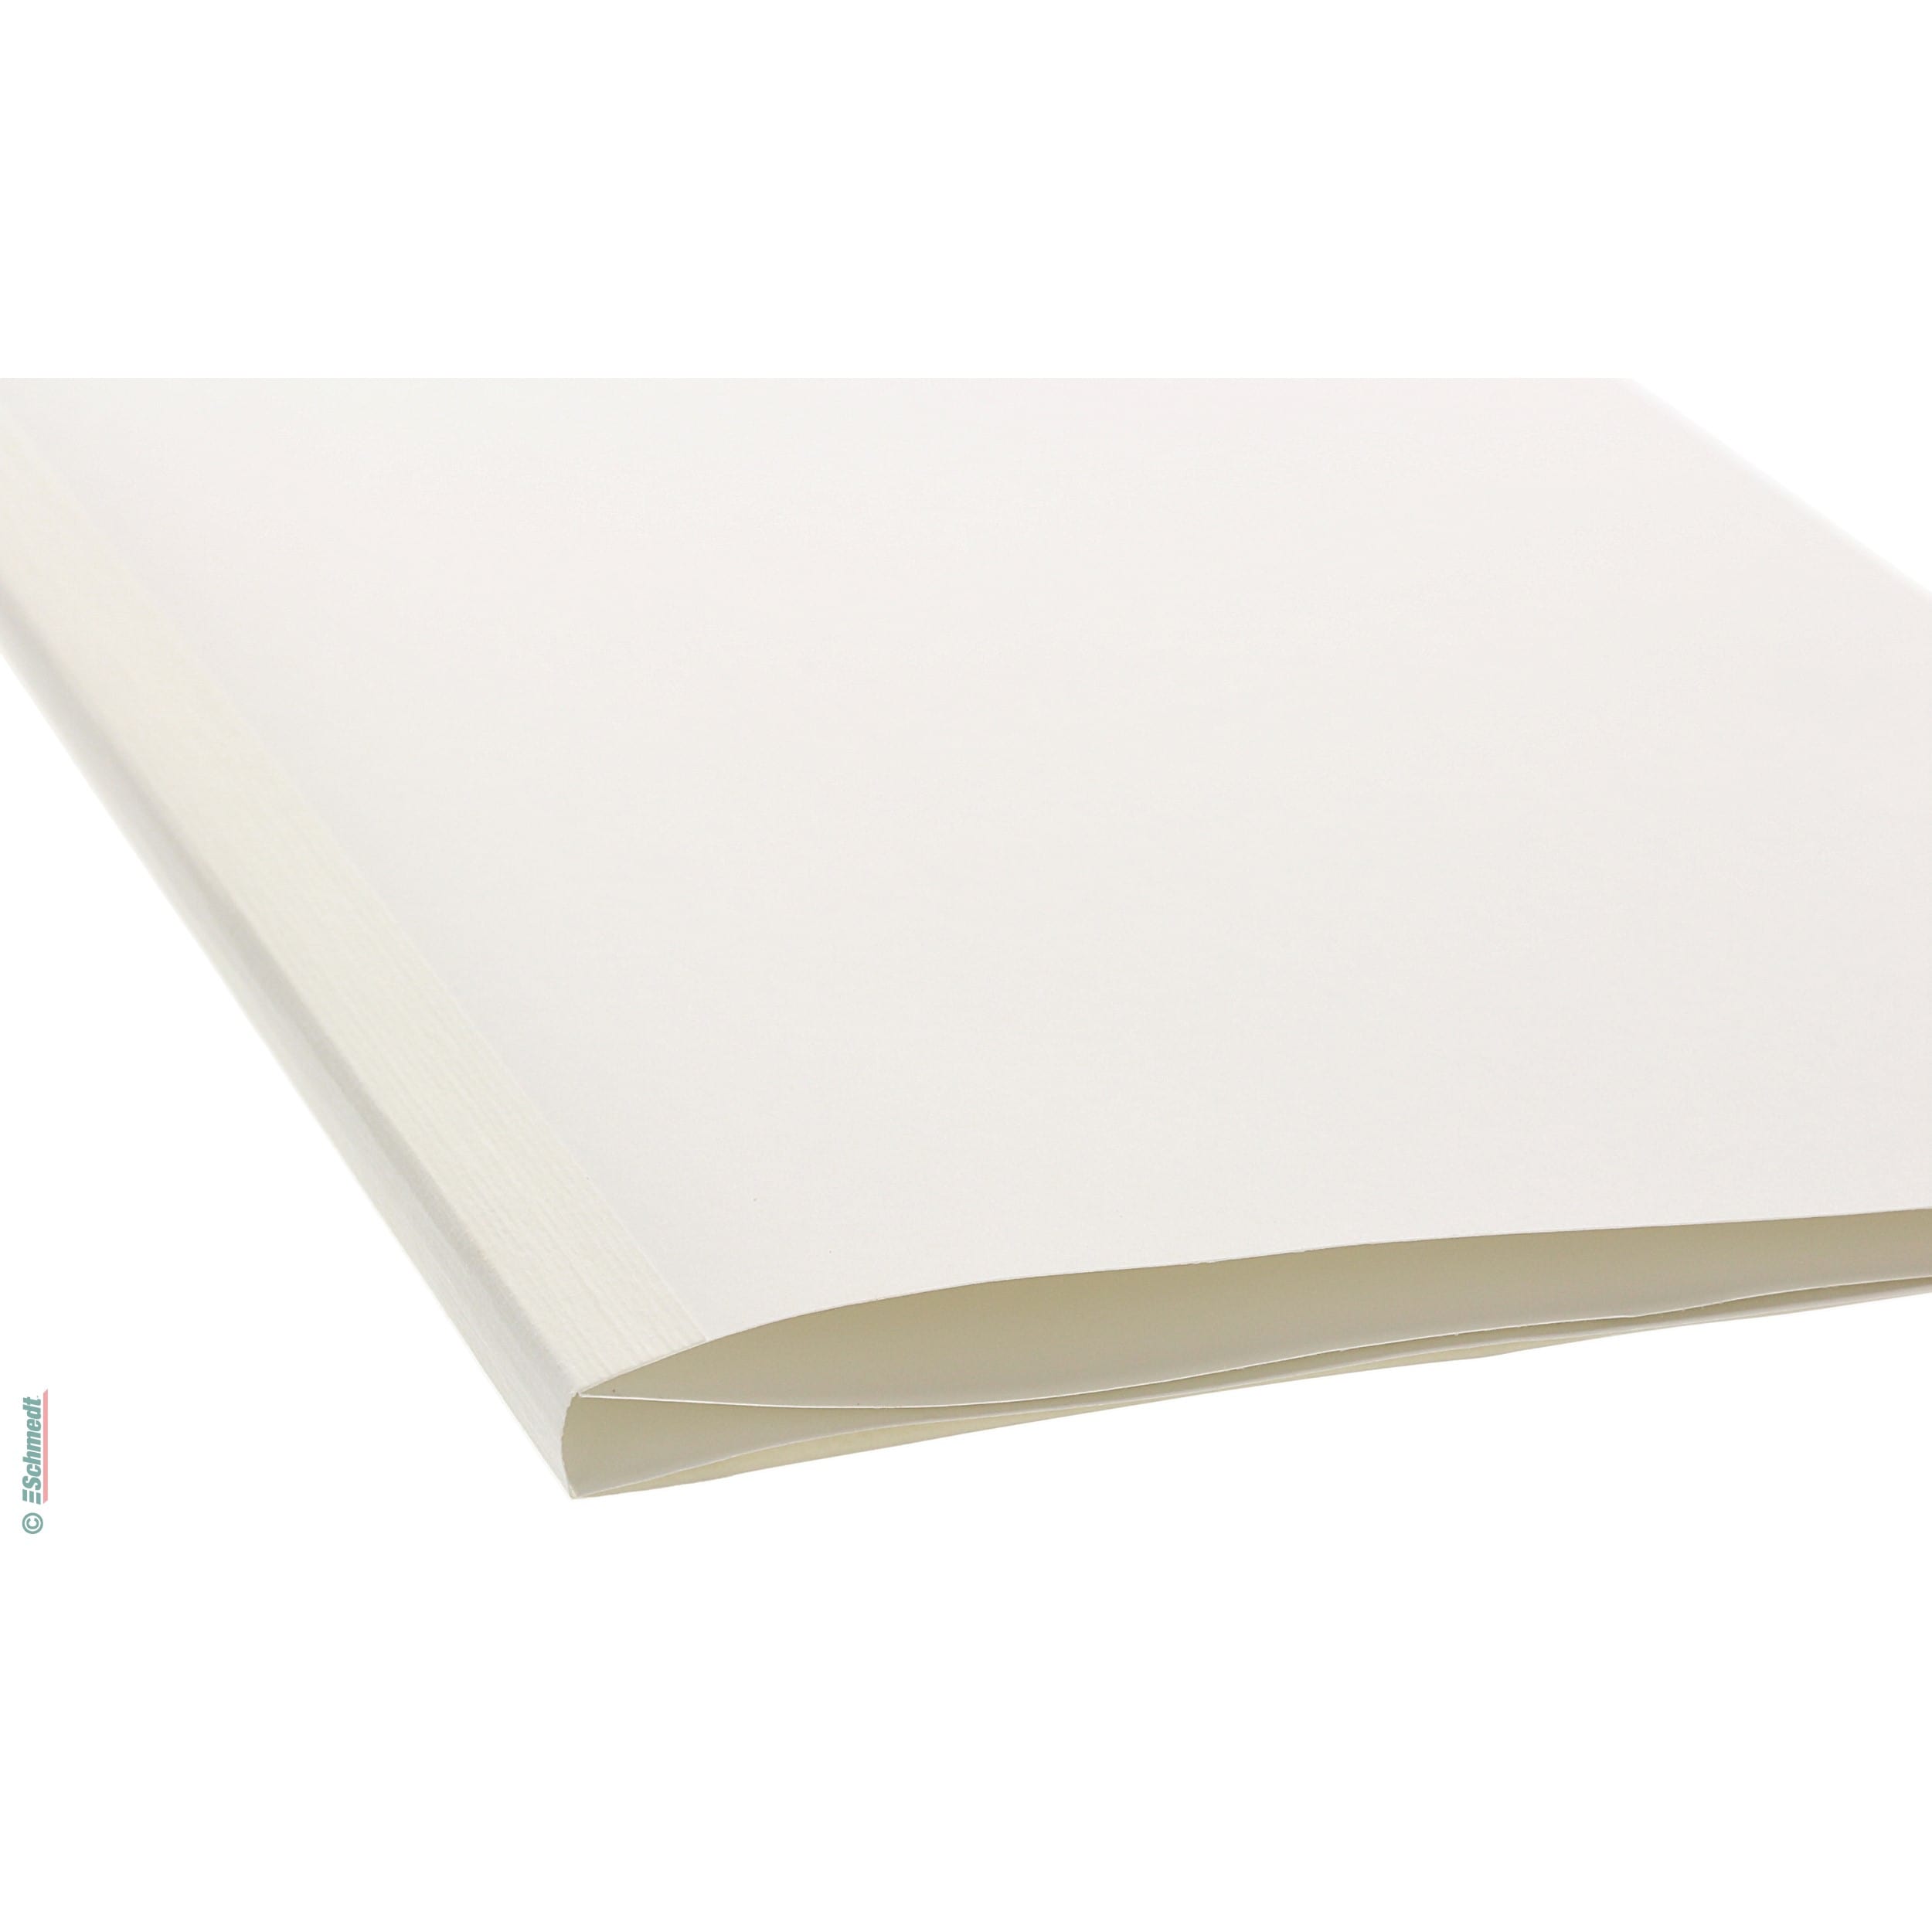 PräziCover - bright white, smooth - FSC® quality - Combined endsheets / DIN A4 portrait - to produce book blocks with real endsheets for har... - image-3